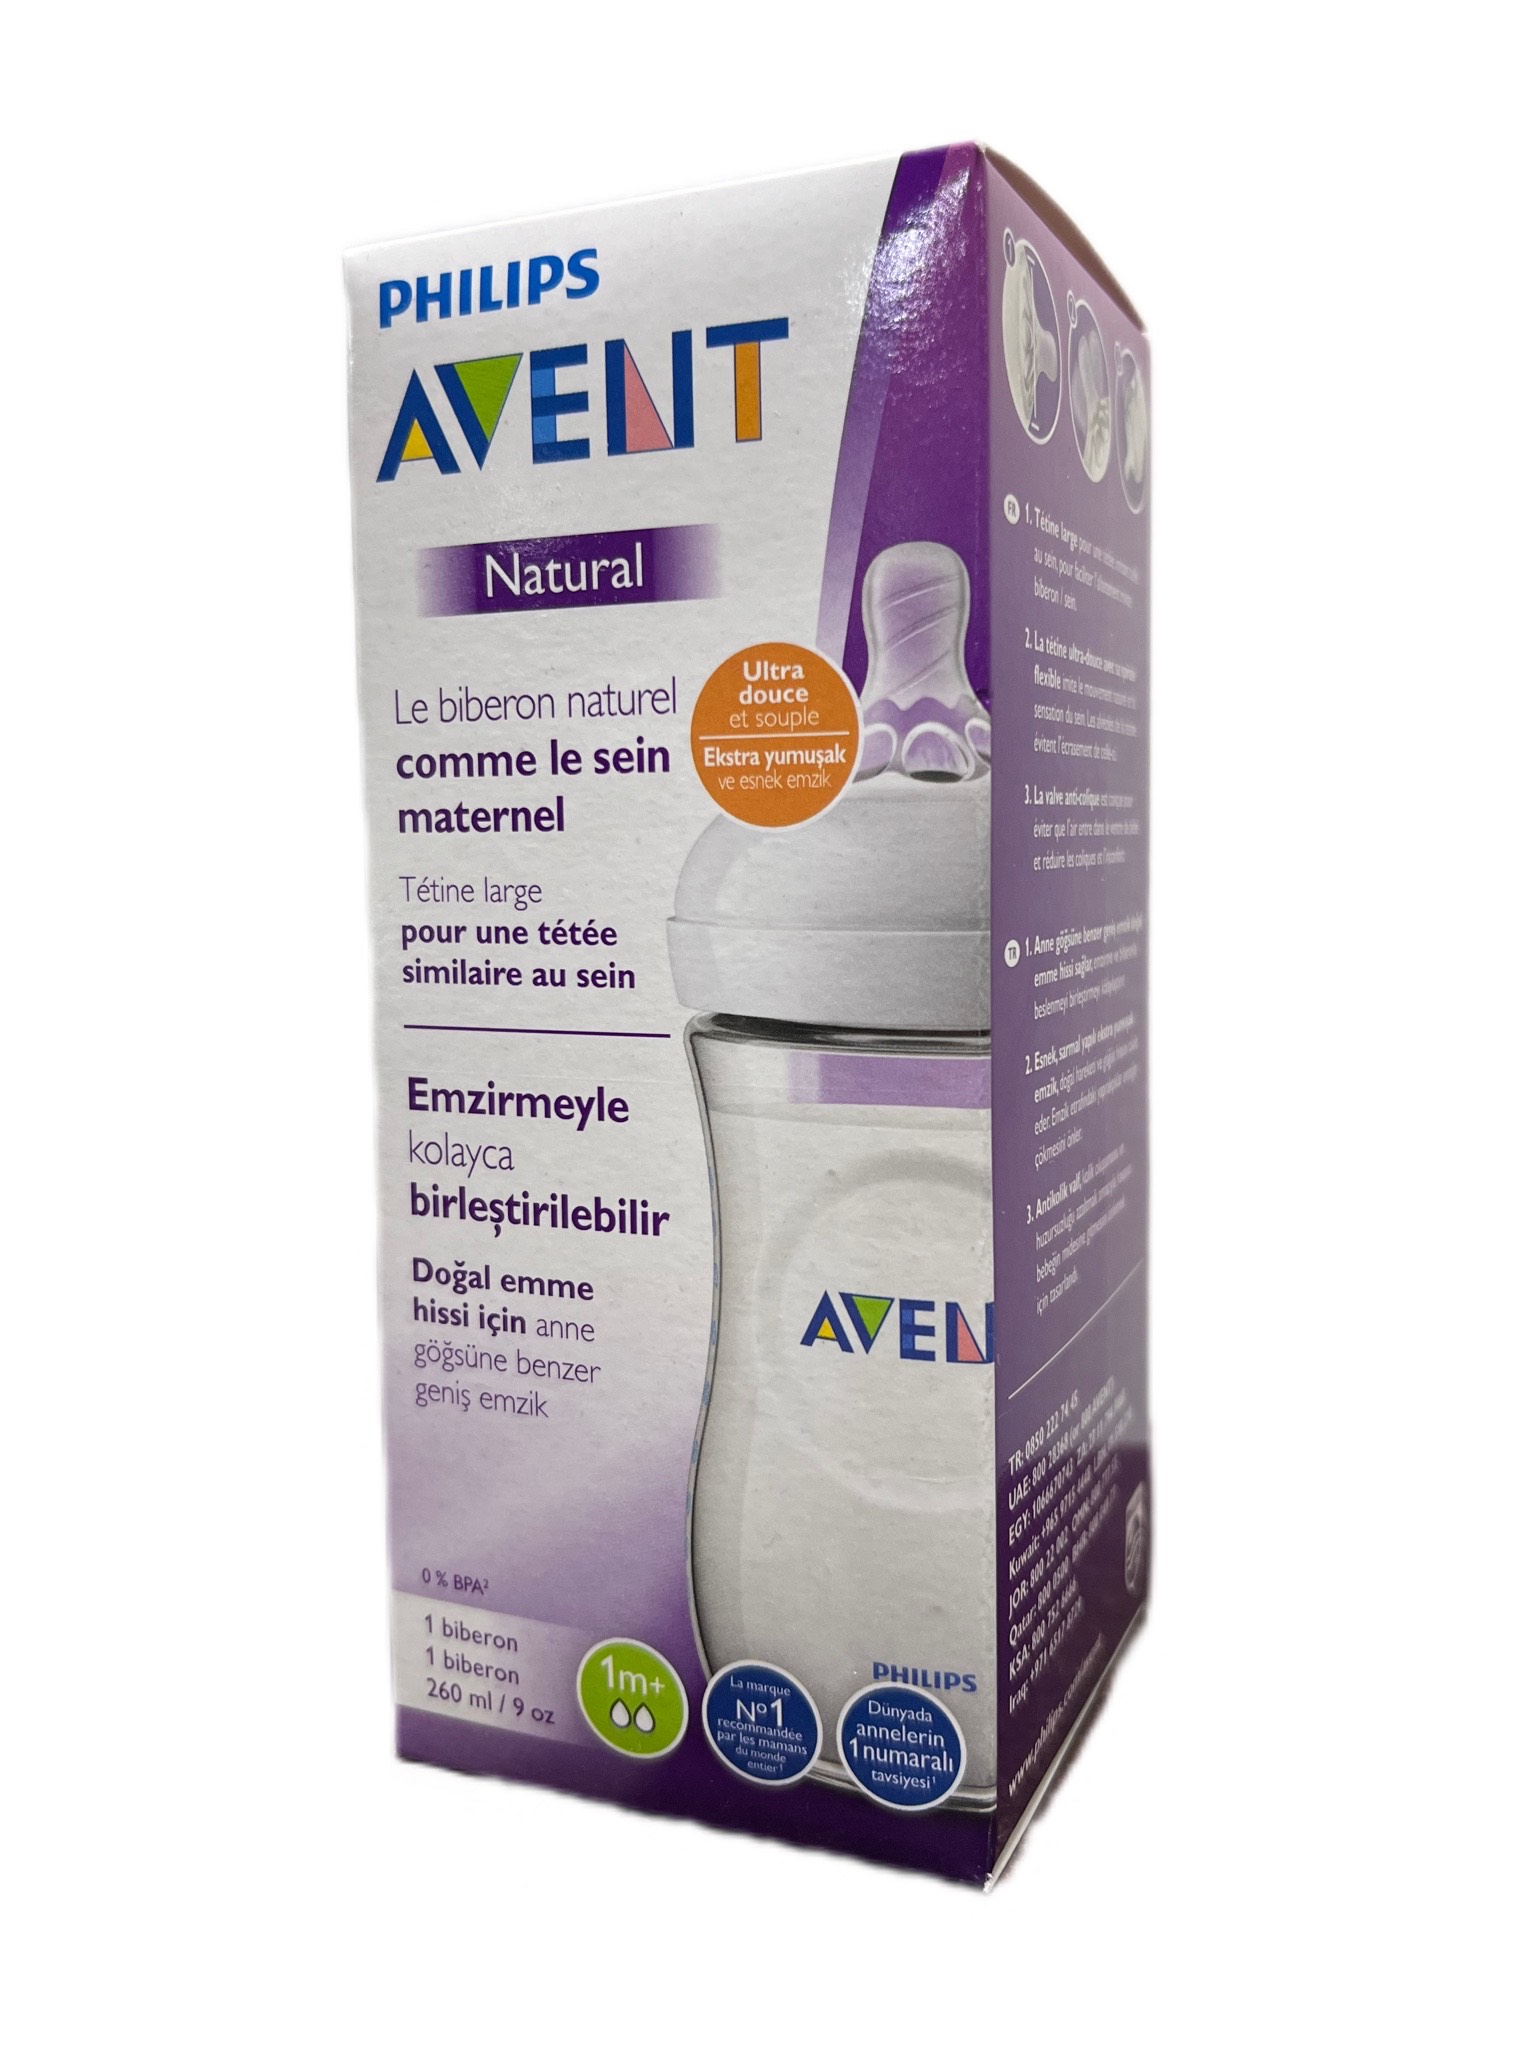 AVENT BY PHILIPS NATURAL LE BIBRON NATURAL COMME LE SEIN MATERNEL 260ml -  Parales3a